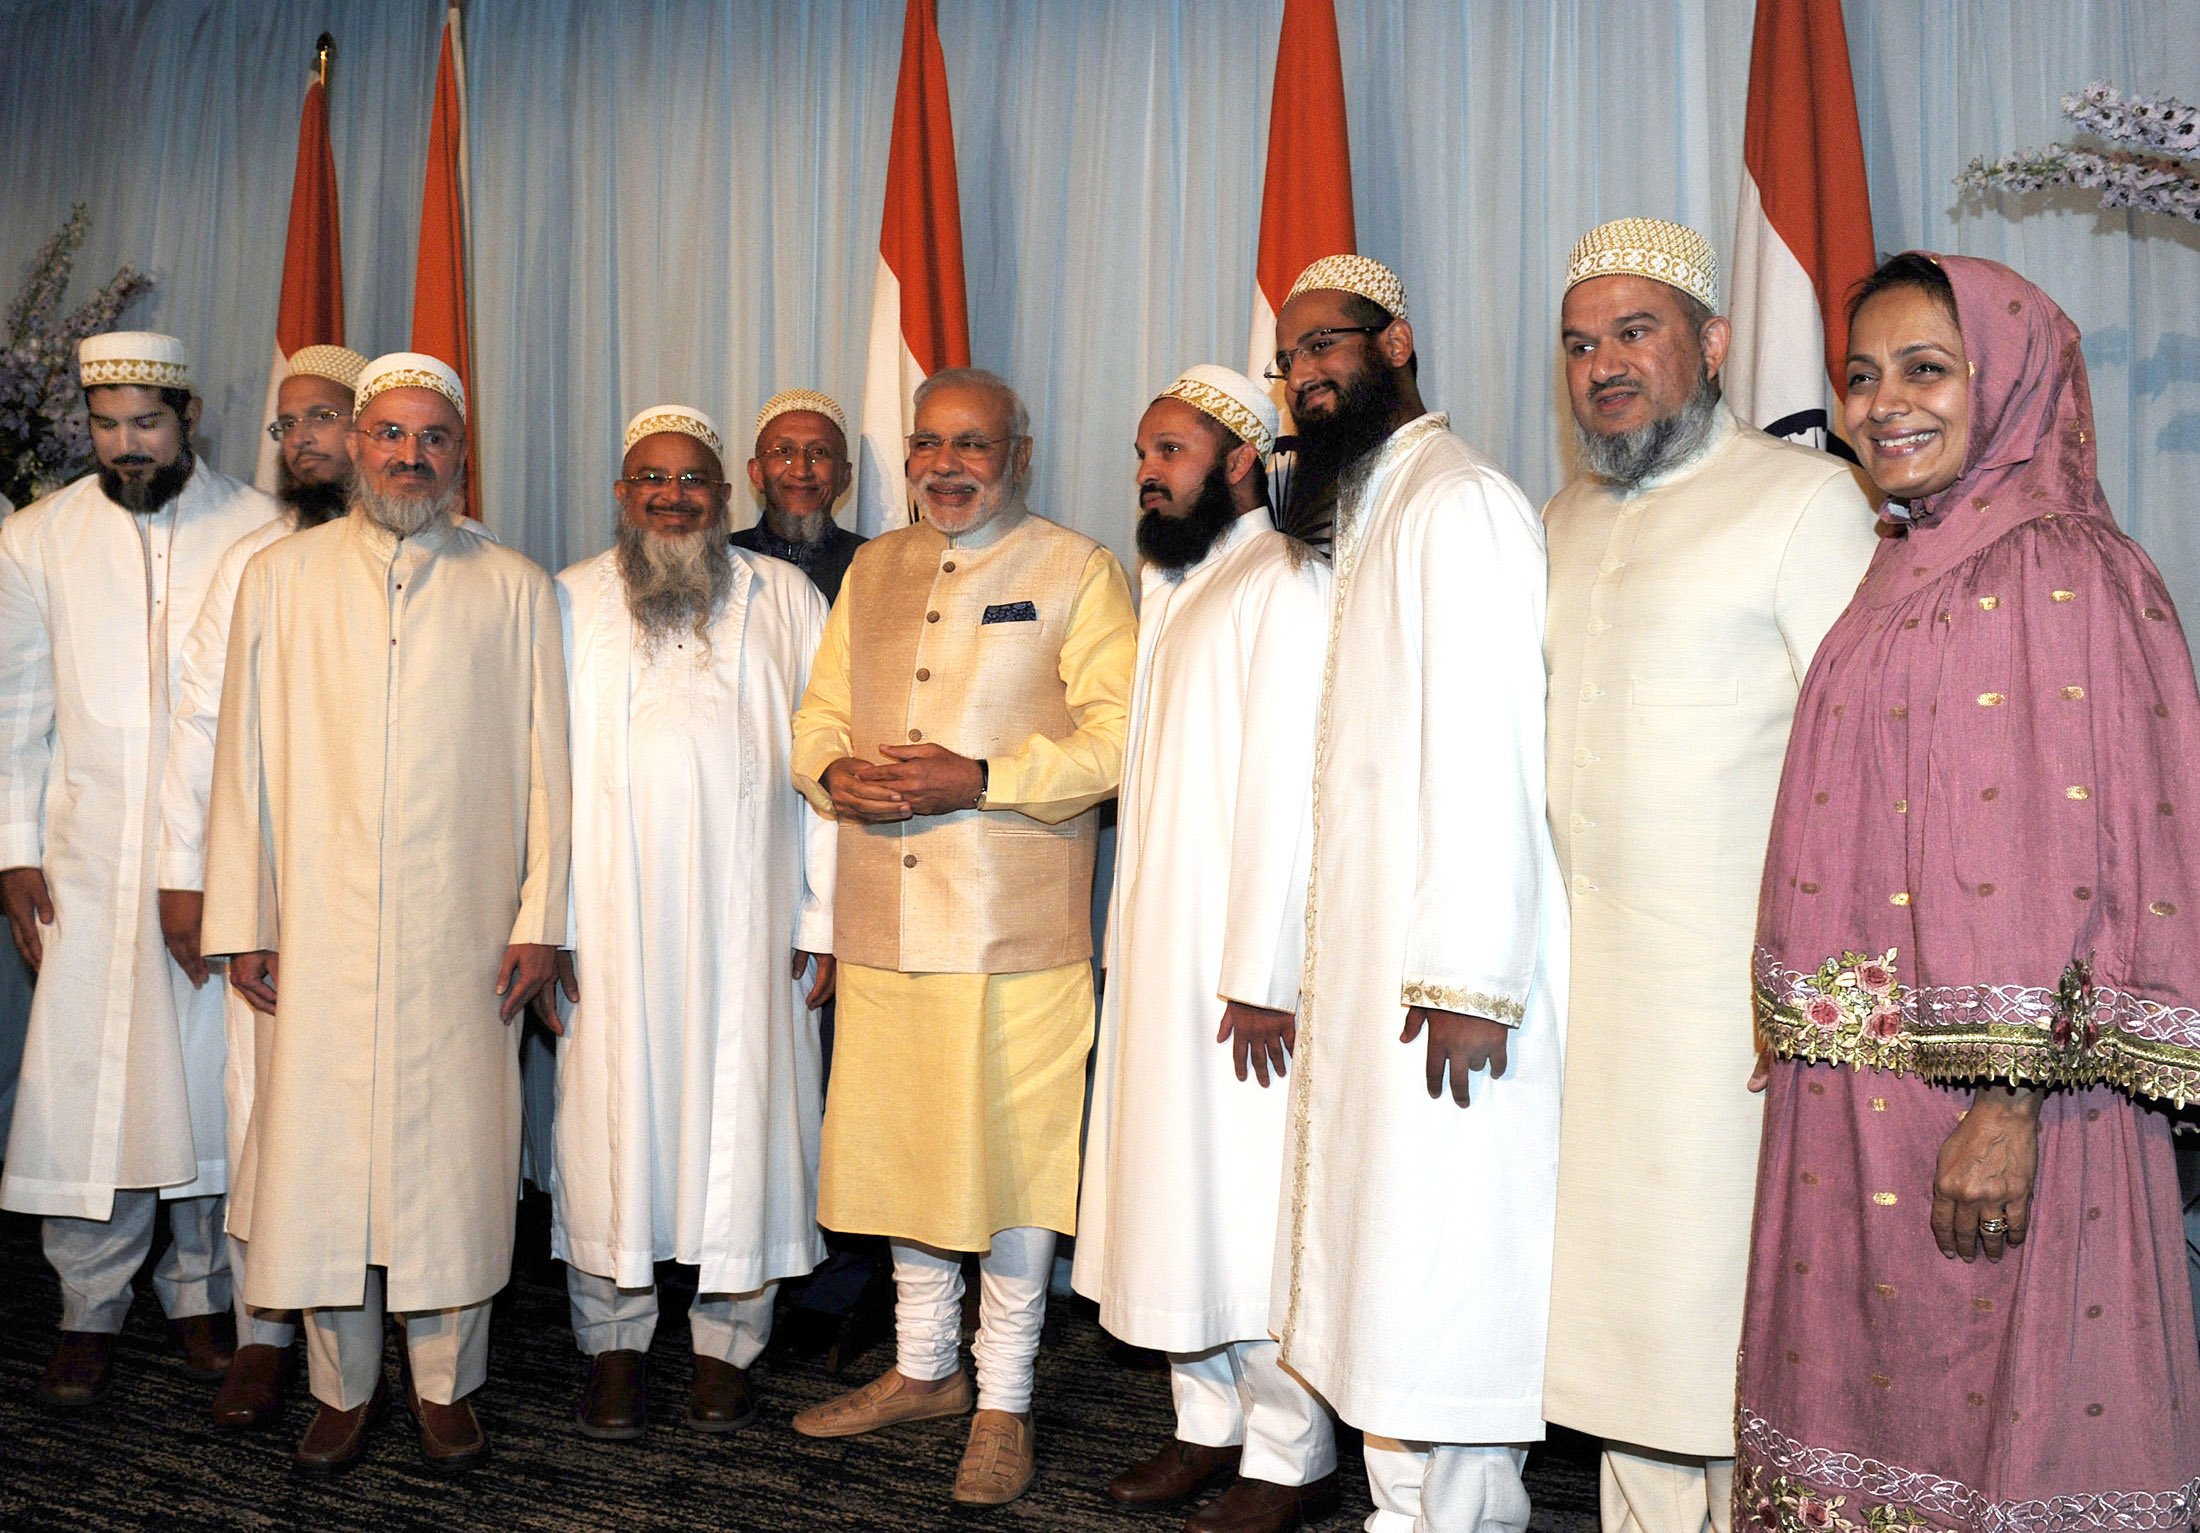 Prime Minister Narendra Modi meeting the Indian community dignitaries, at dinner hosted by the Indian Ambassador